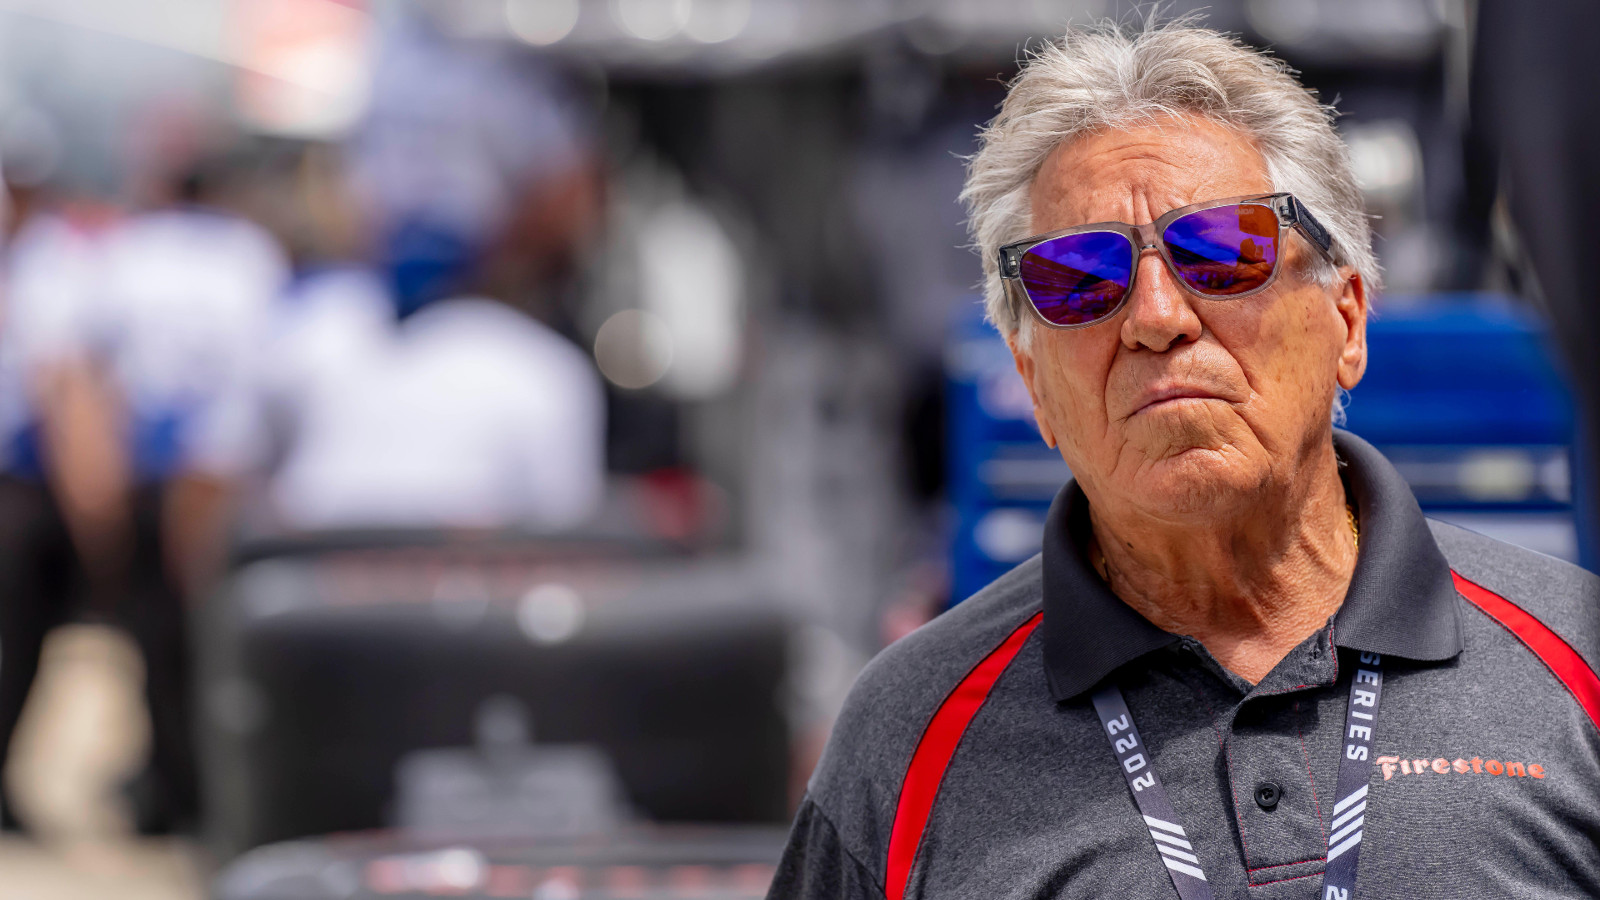 Andretti Cadillac Ramps Up F1 Efforts with 60 New UK Hires